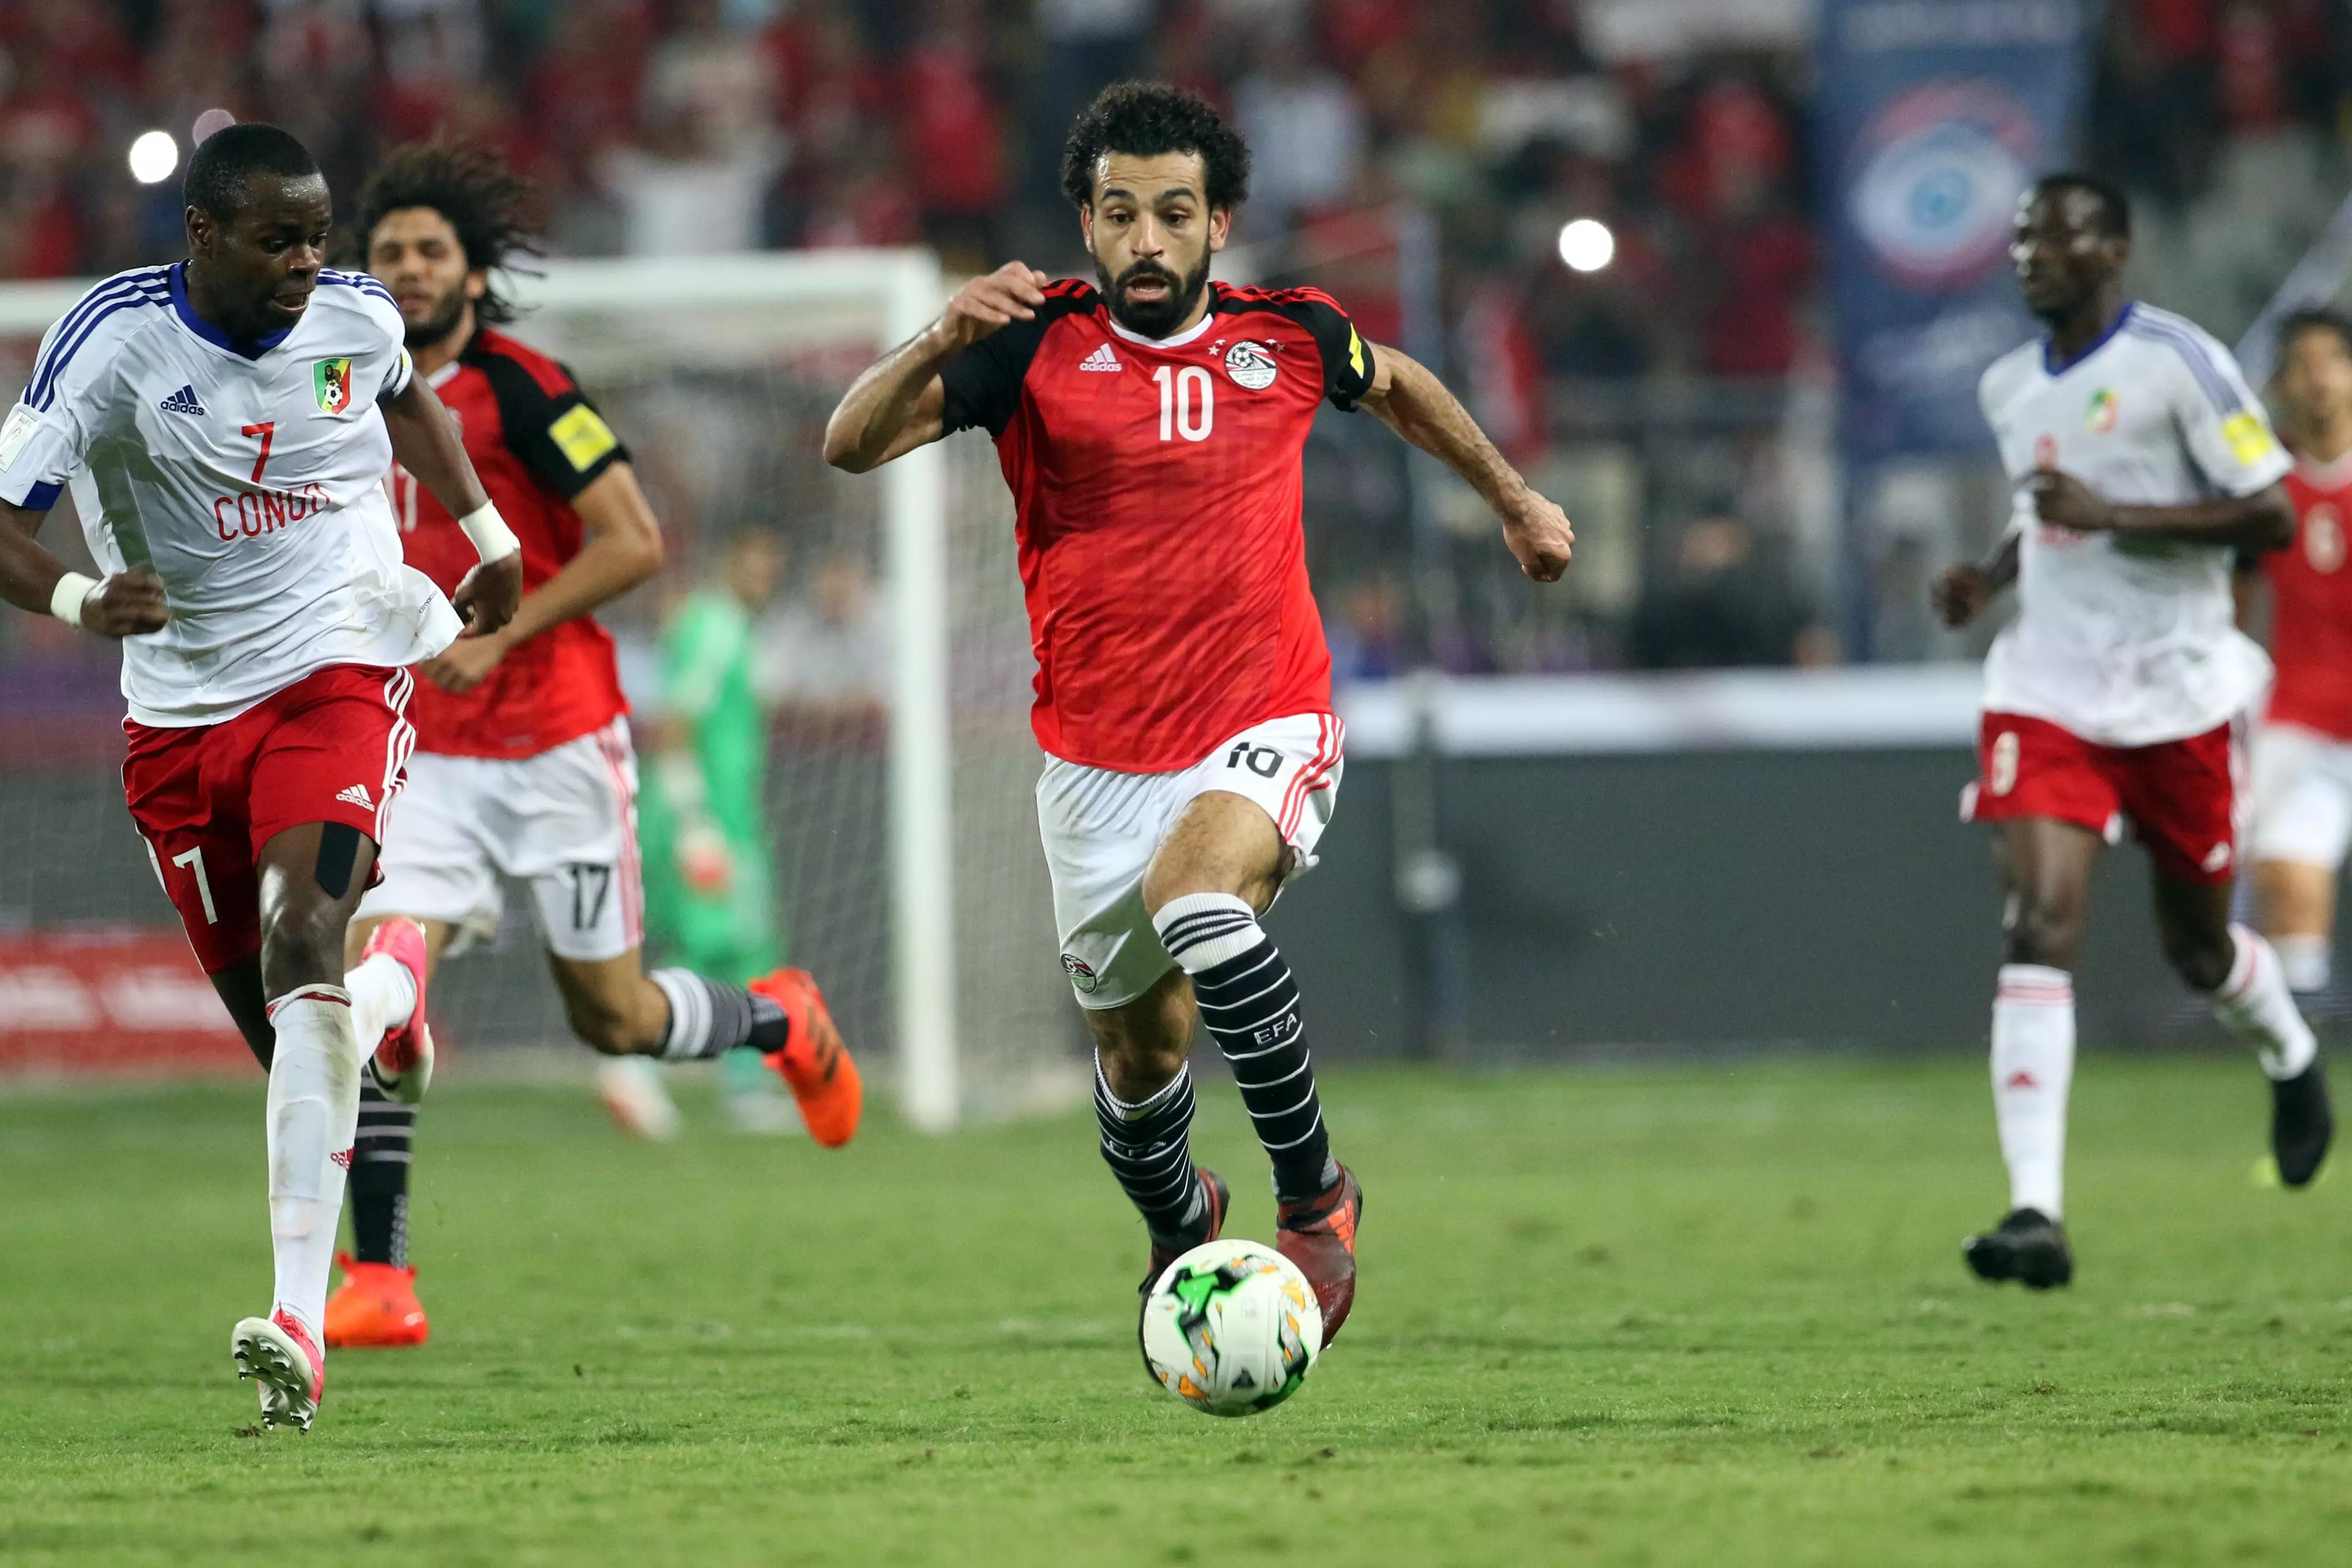 Salah was influential in Egypt qualifying for their first World Cup since 1990. Image: PA Images